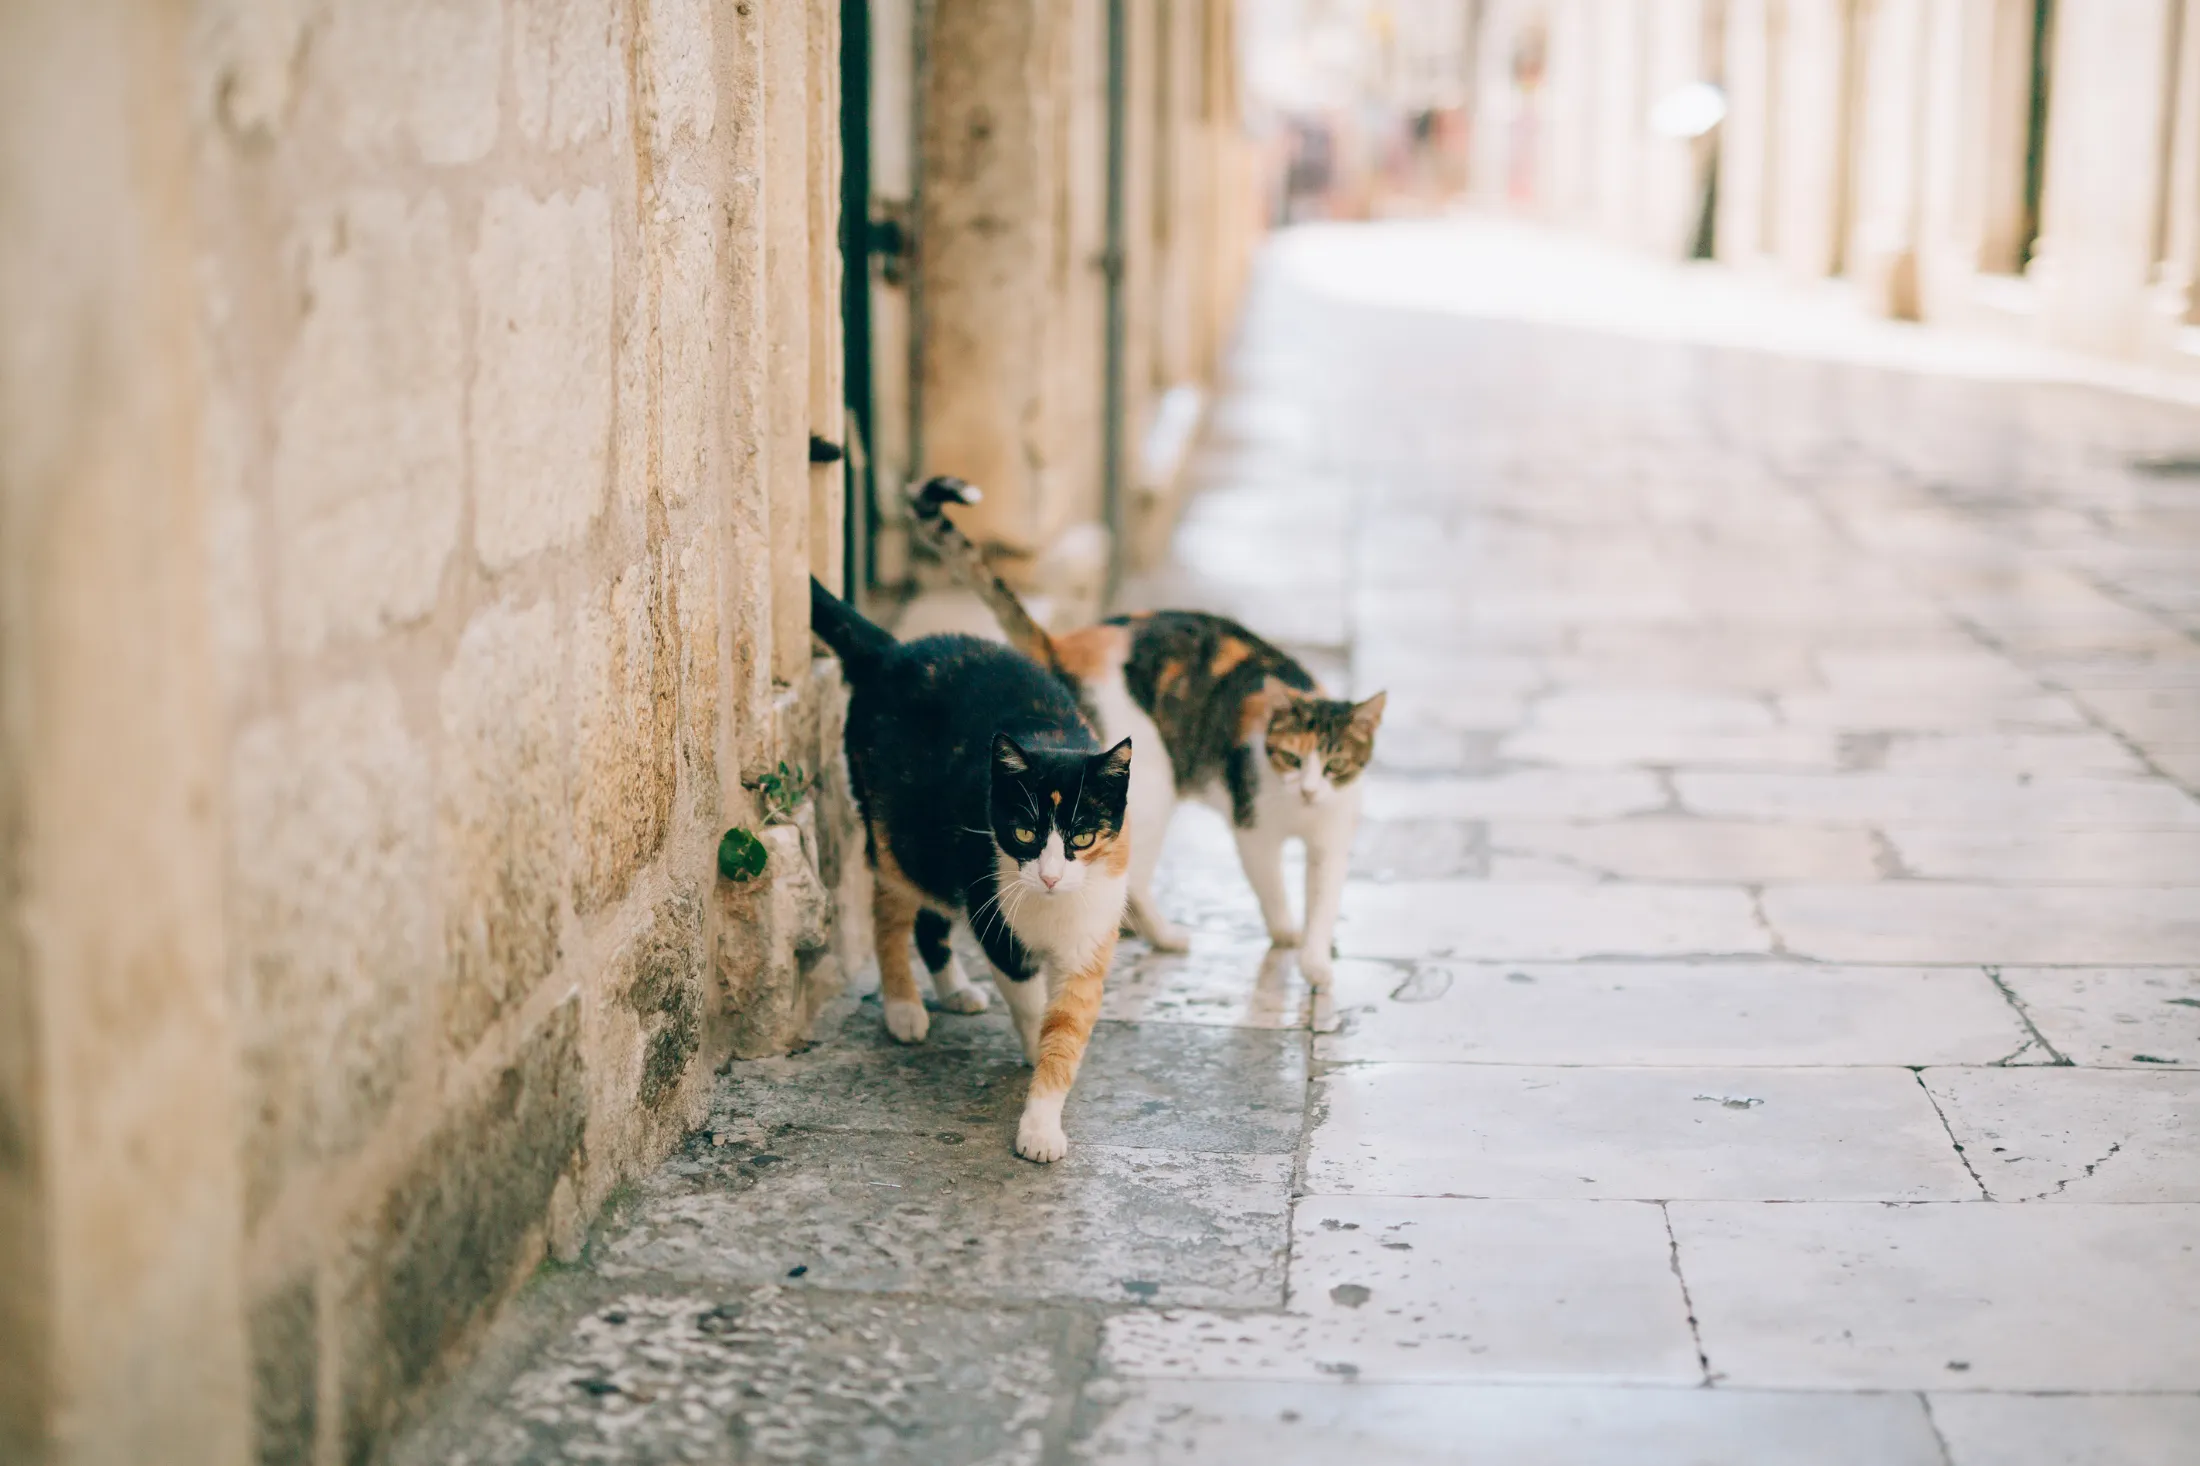 Two cats in Old Town Kotor.